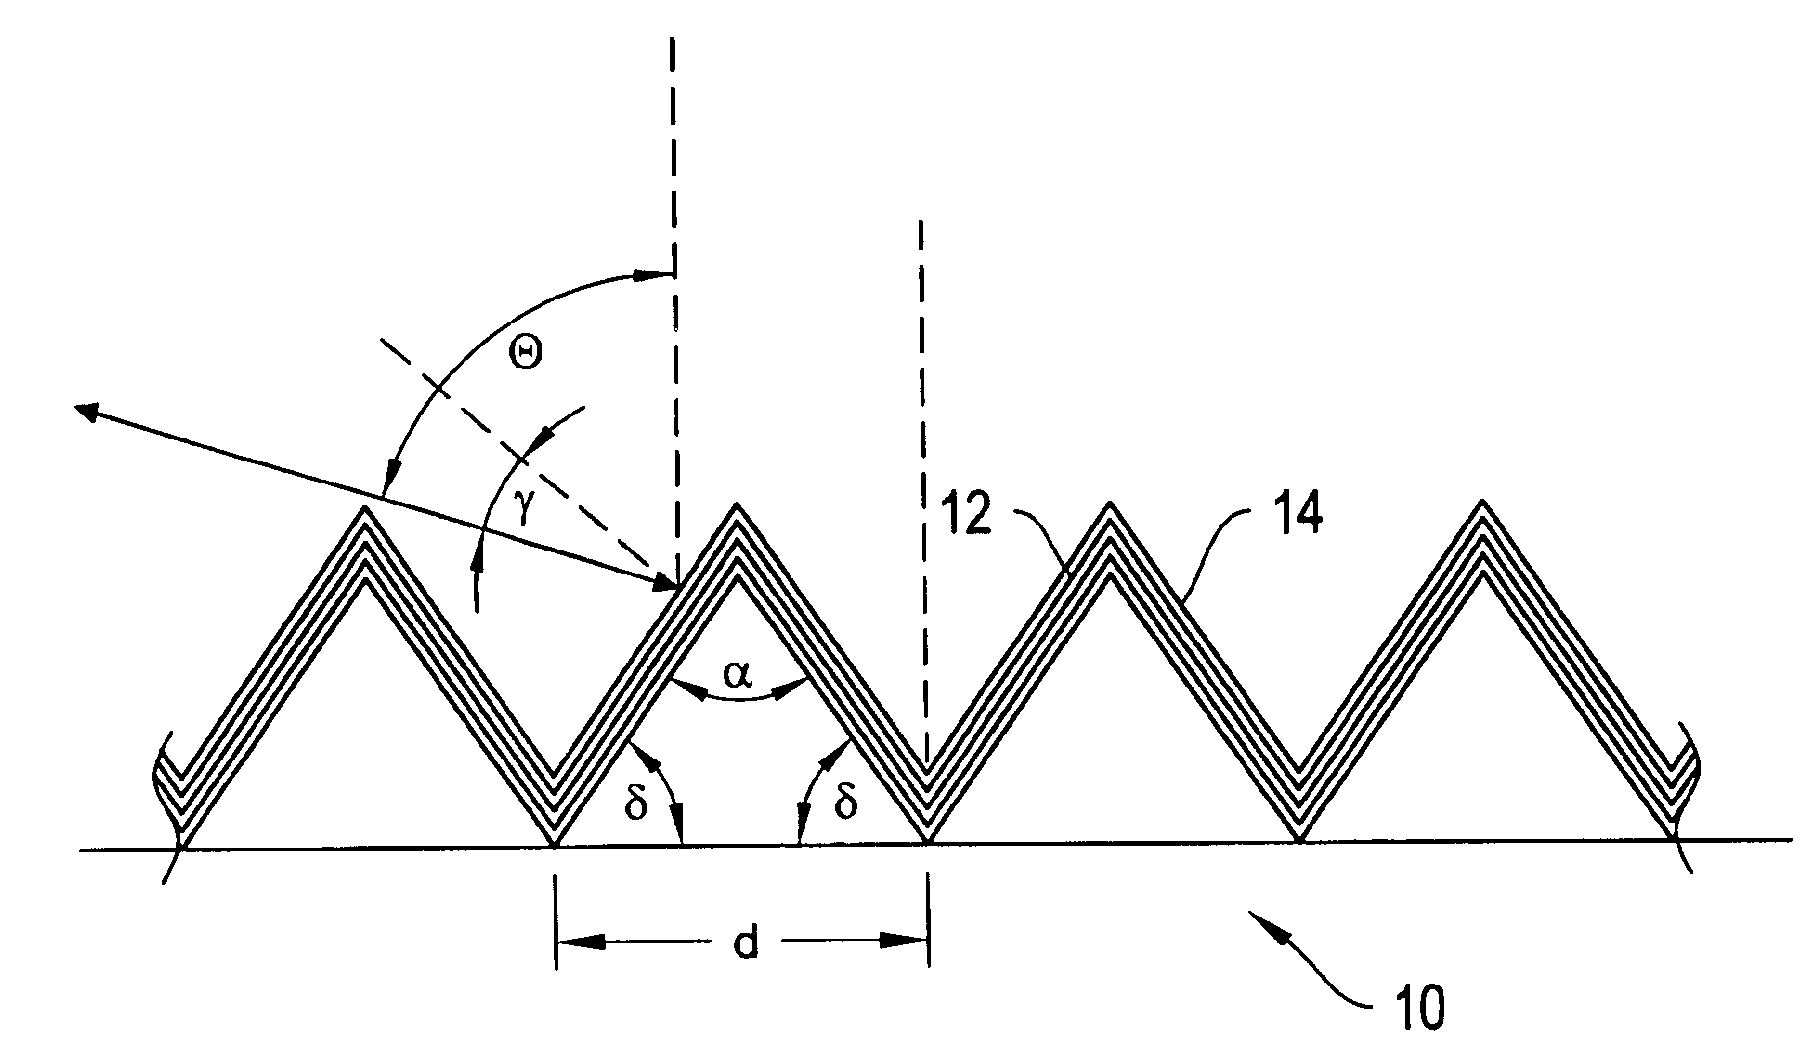 Grating device with high diffraction efficiency